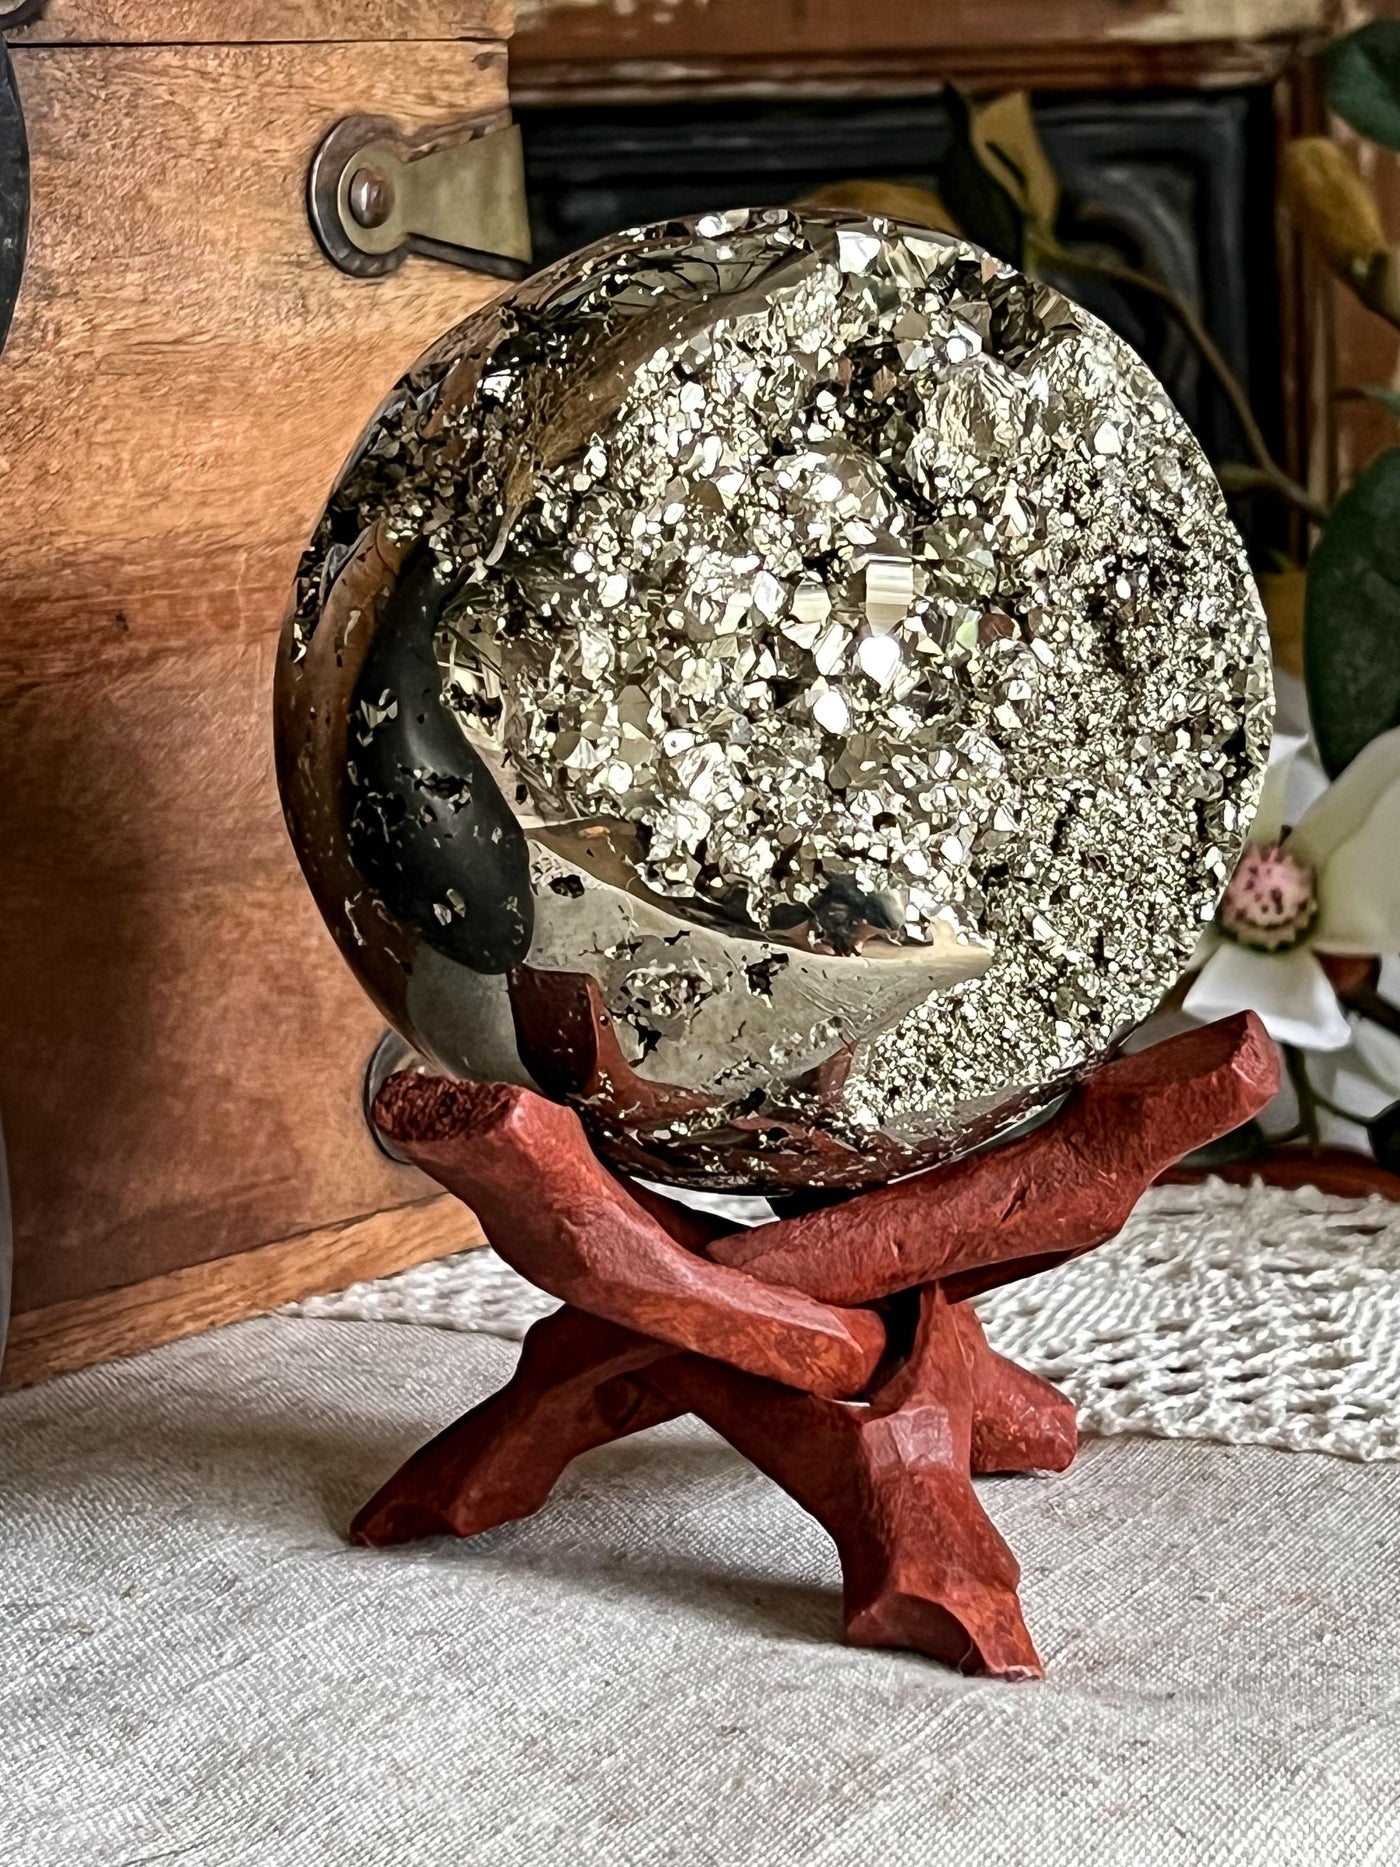 PYRITE SPHERE FROM PERU XL Revive In Style Vintage Furniture Painted Refinished Redesign Beautiful One of a Kind Artistic Antique Unique Home Decor Interior Design French Country Shabby Chic Cottage Farmhouse Grandmillenial Coastal Chalk Paint Metallic Glam Eclectic Quality Dovetailed Rustic Furniture Painter Pinterest Bedroom Living Room Entryway Kitchen Home Trends House Styles Decorating ideas